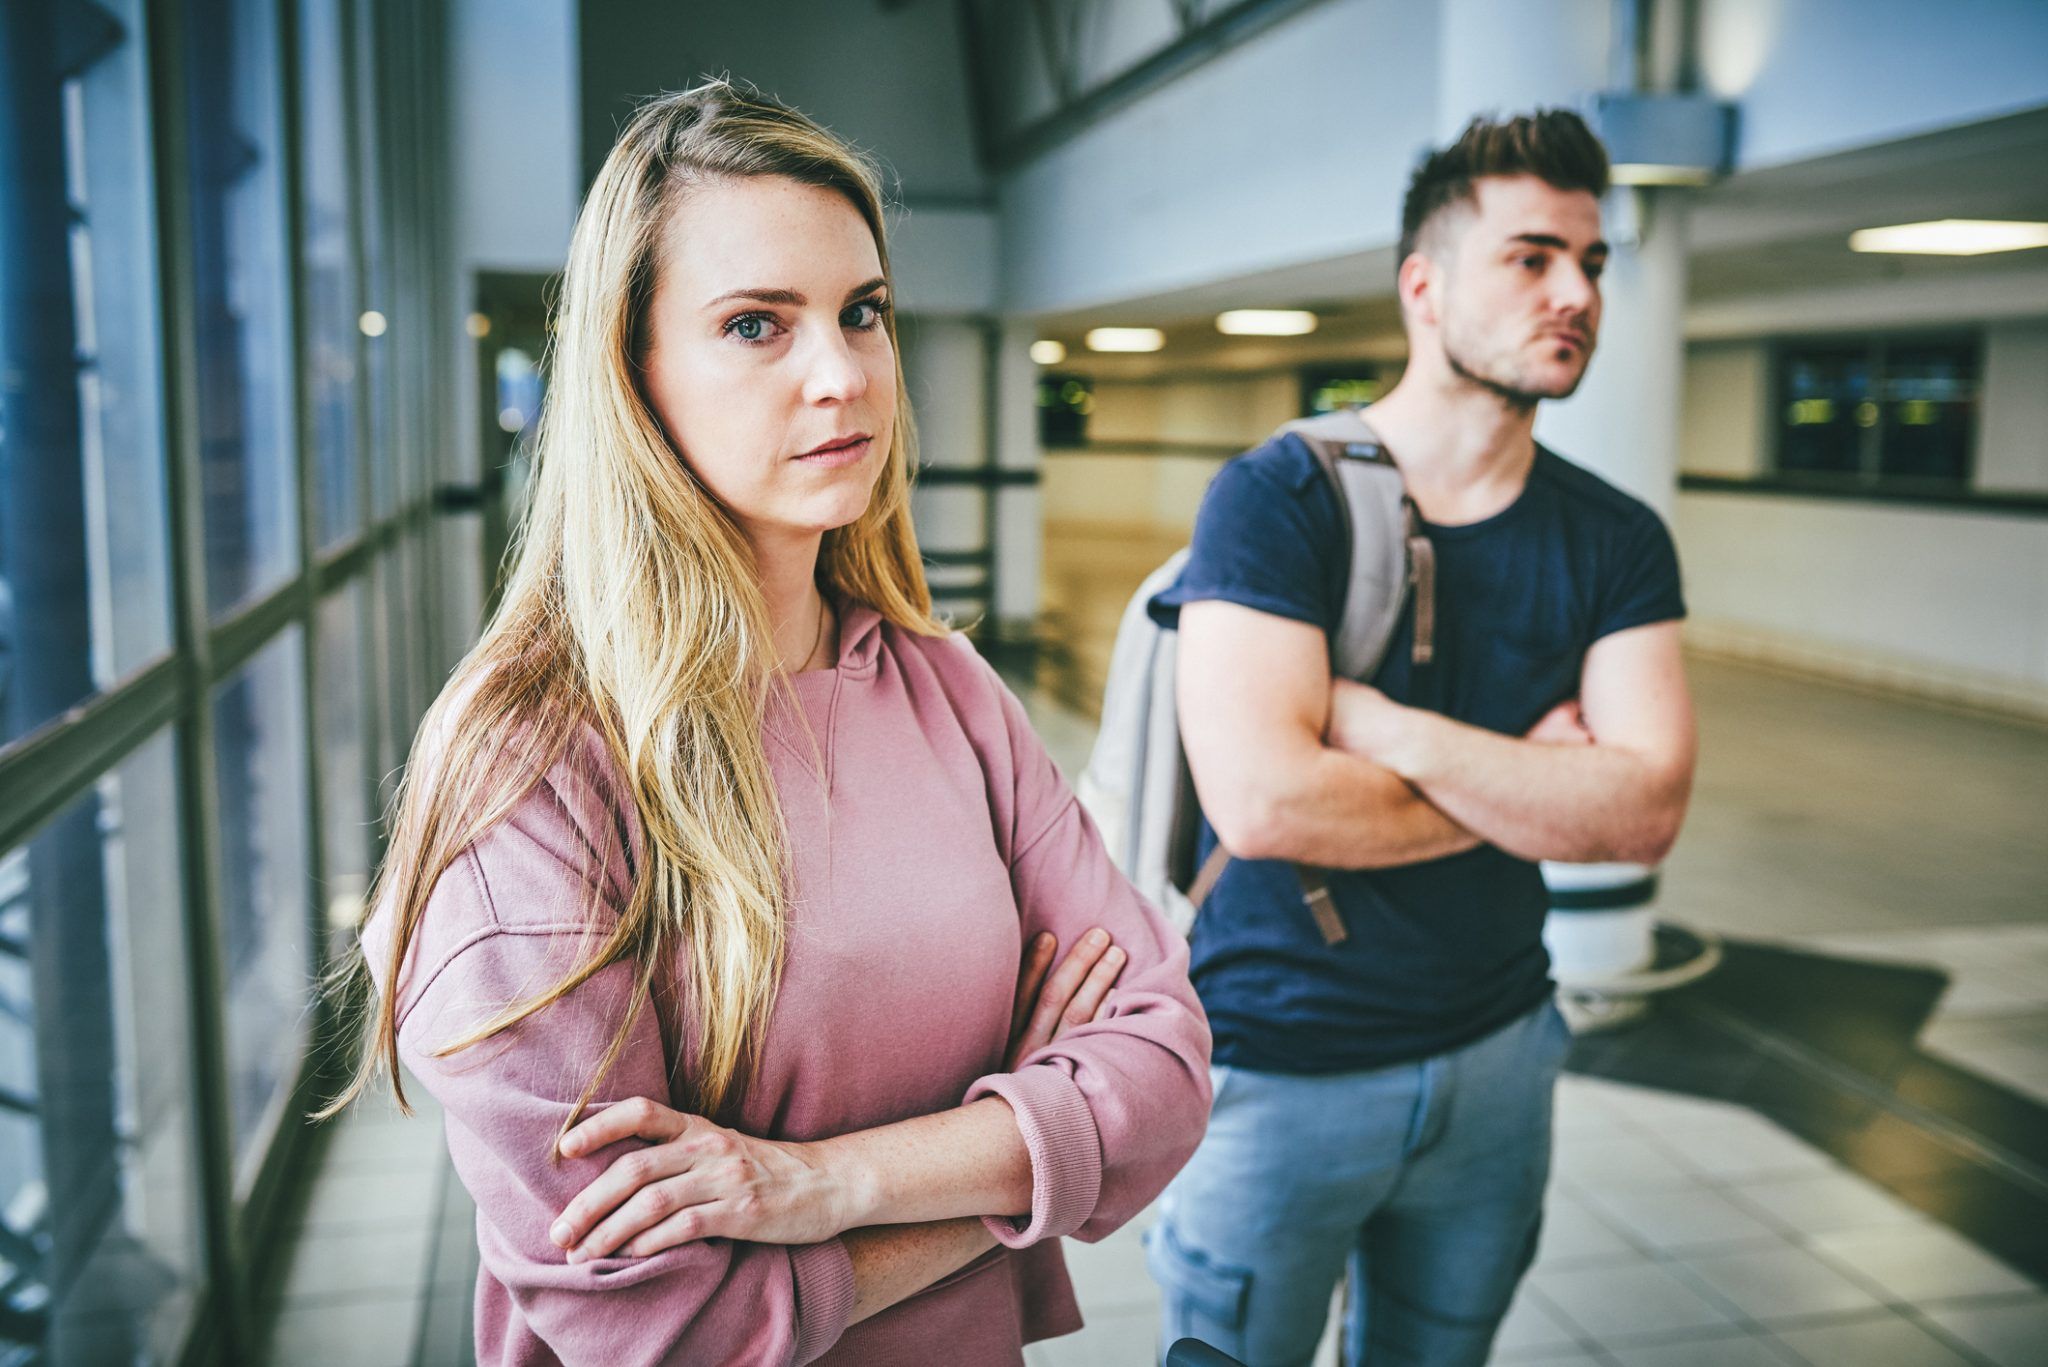 Girlfriend looking unimpressed in airport while boyfriend stands back